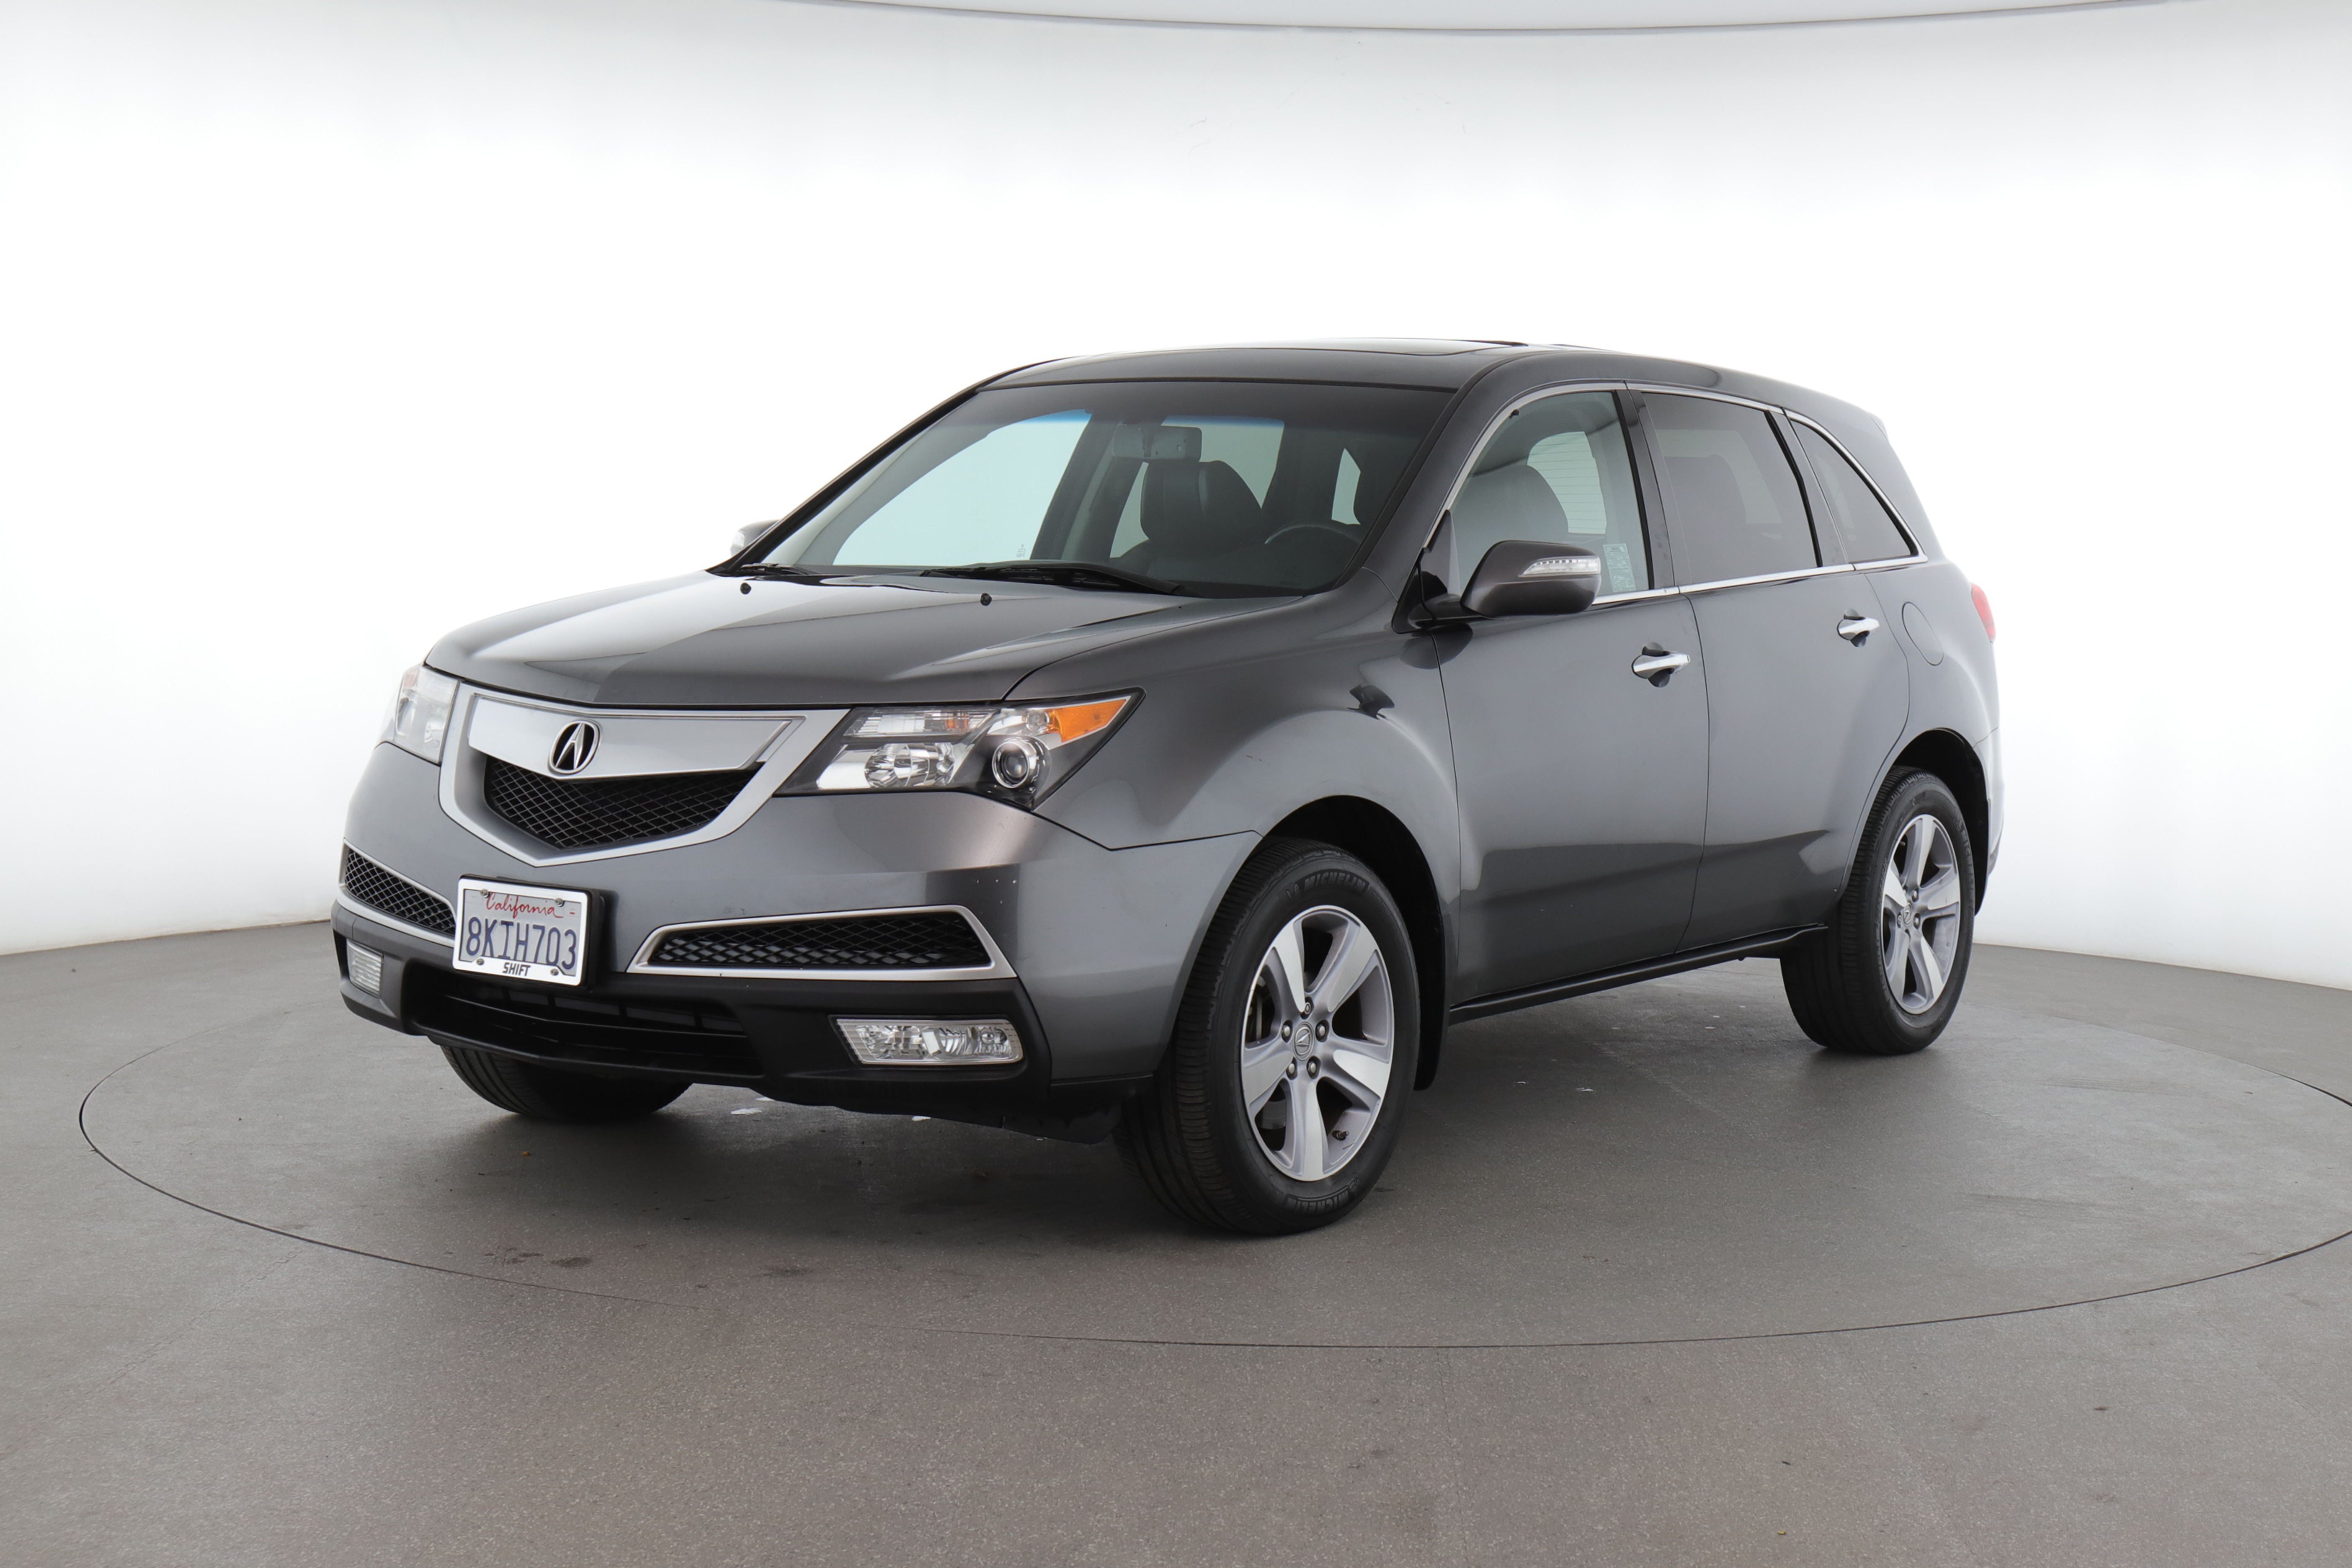 Used 2012 Gray Acura MDX for $18,750